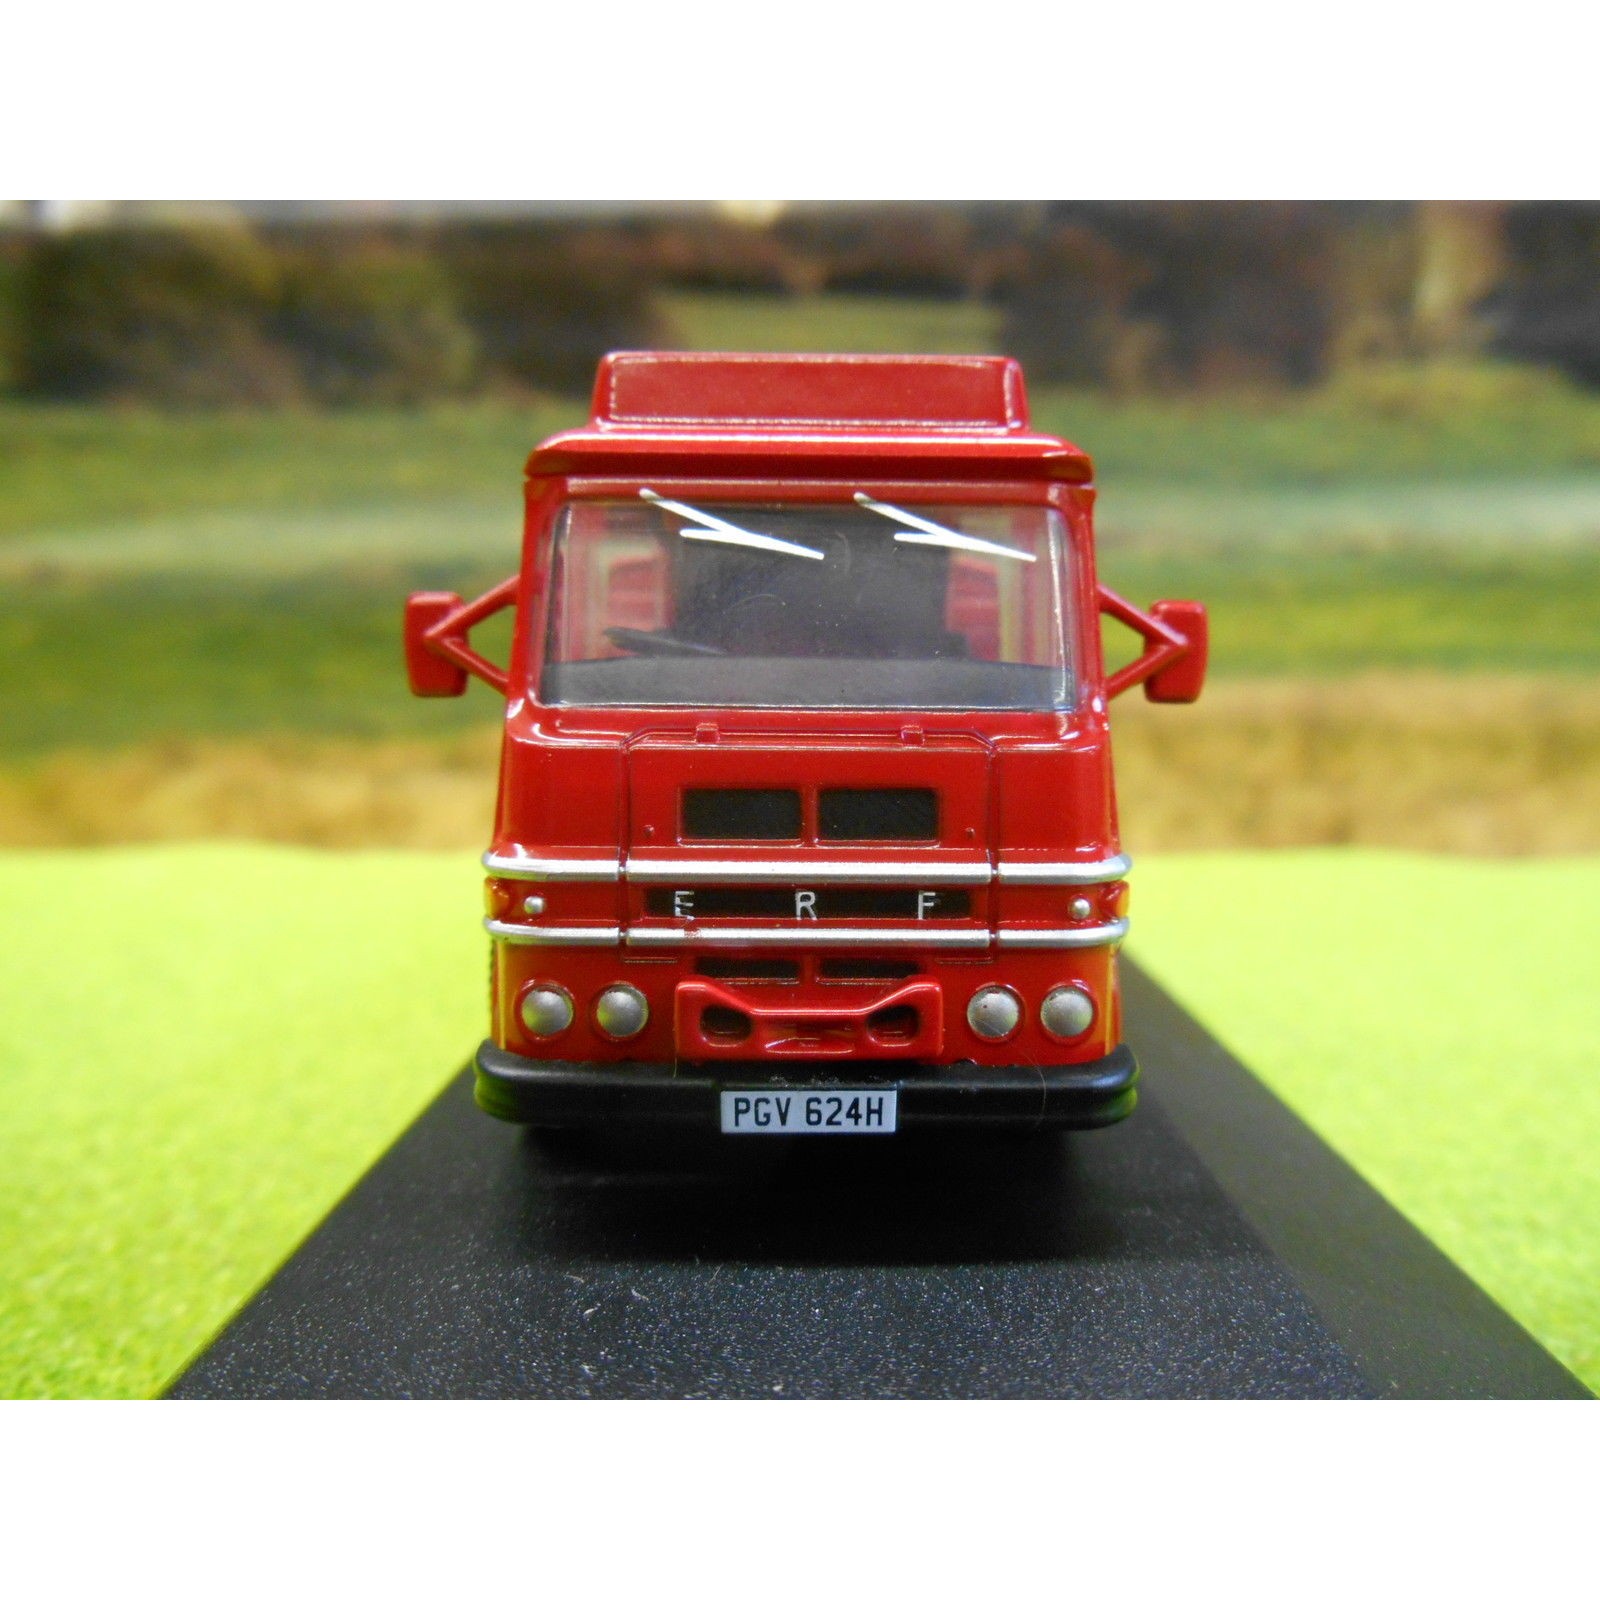 OXFORD 1/76th Haulage 76LV001   ERF Flatbed Red